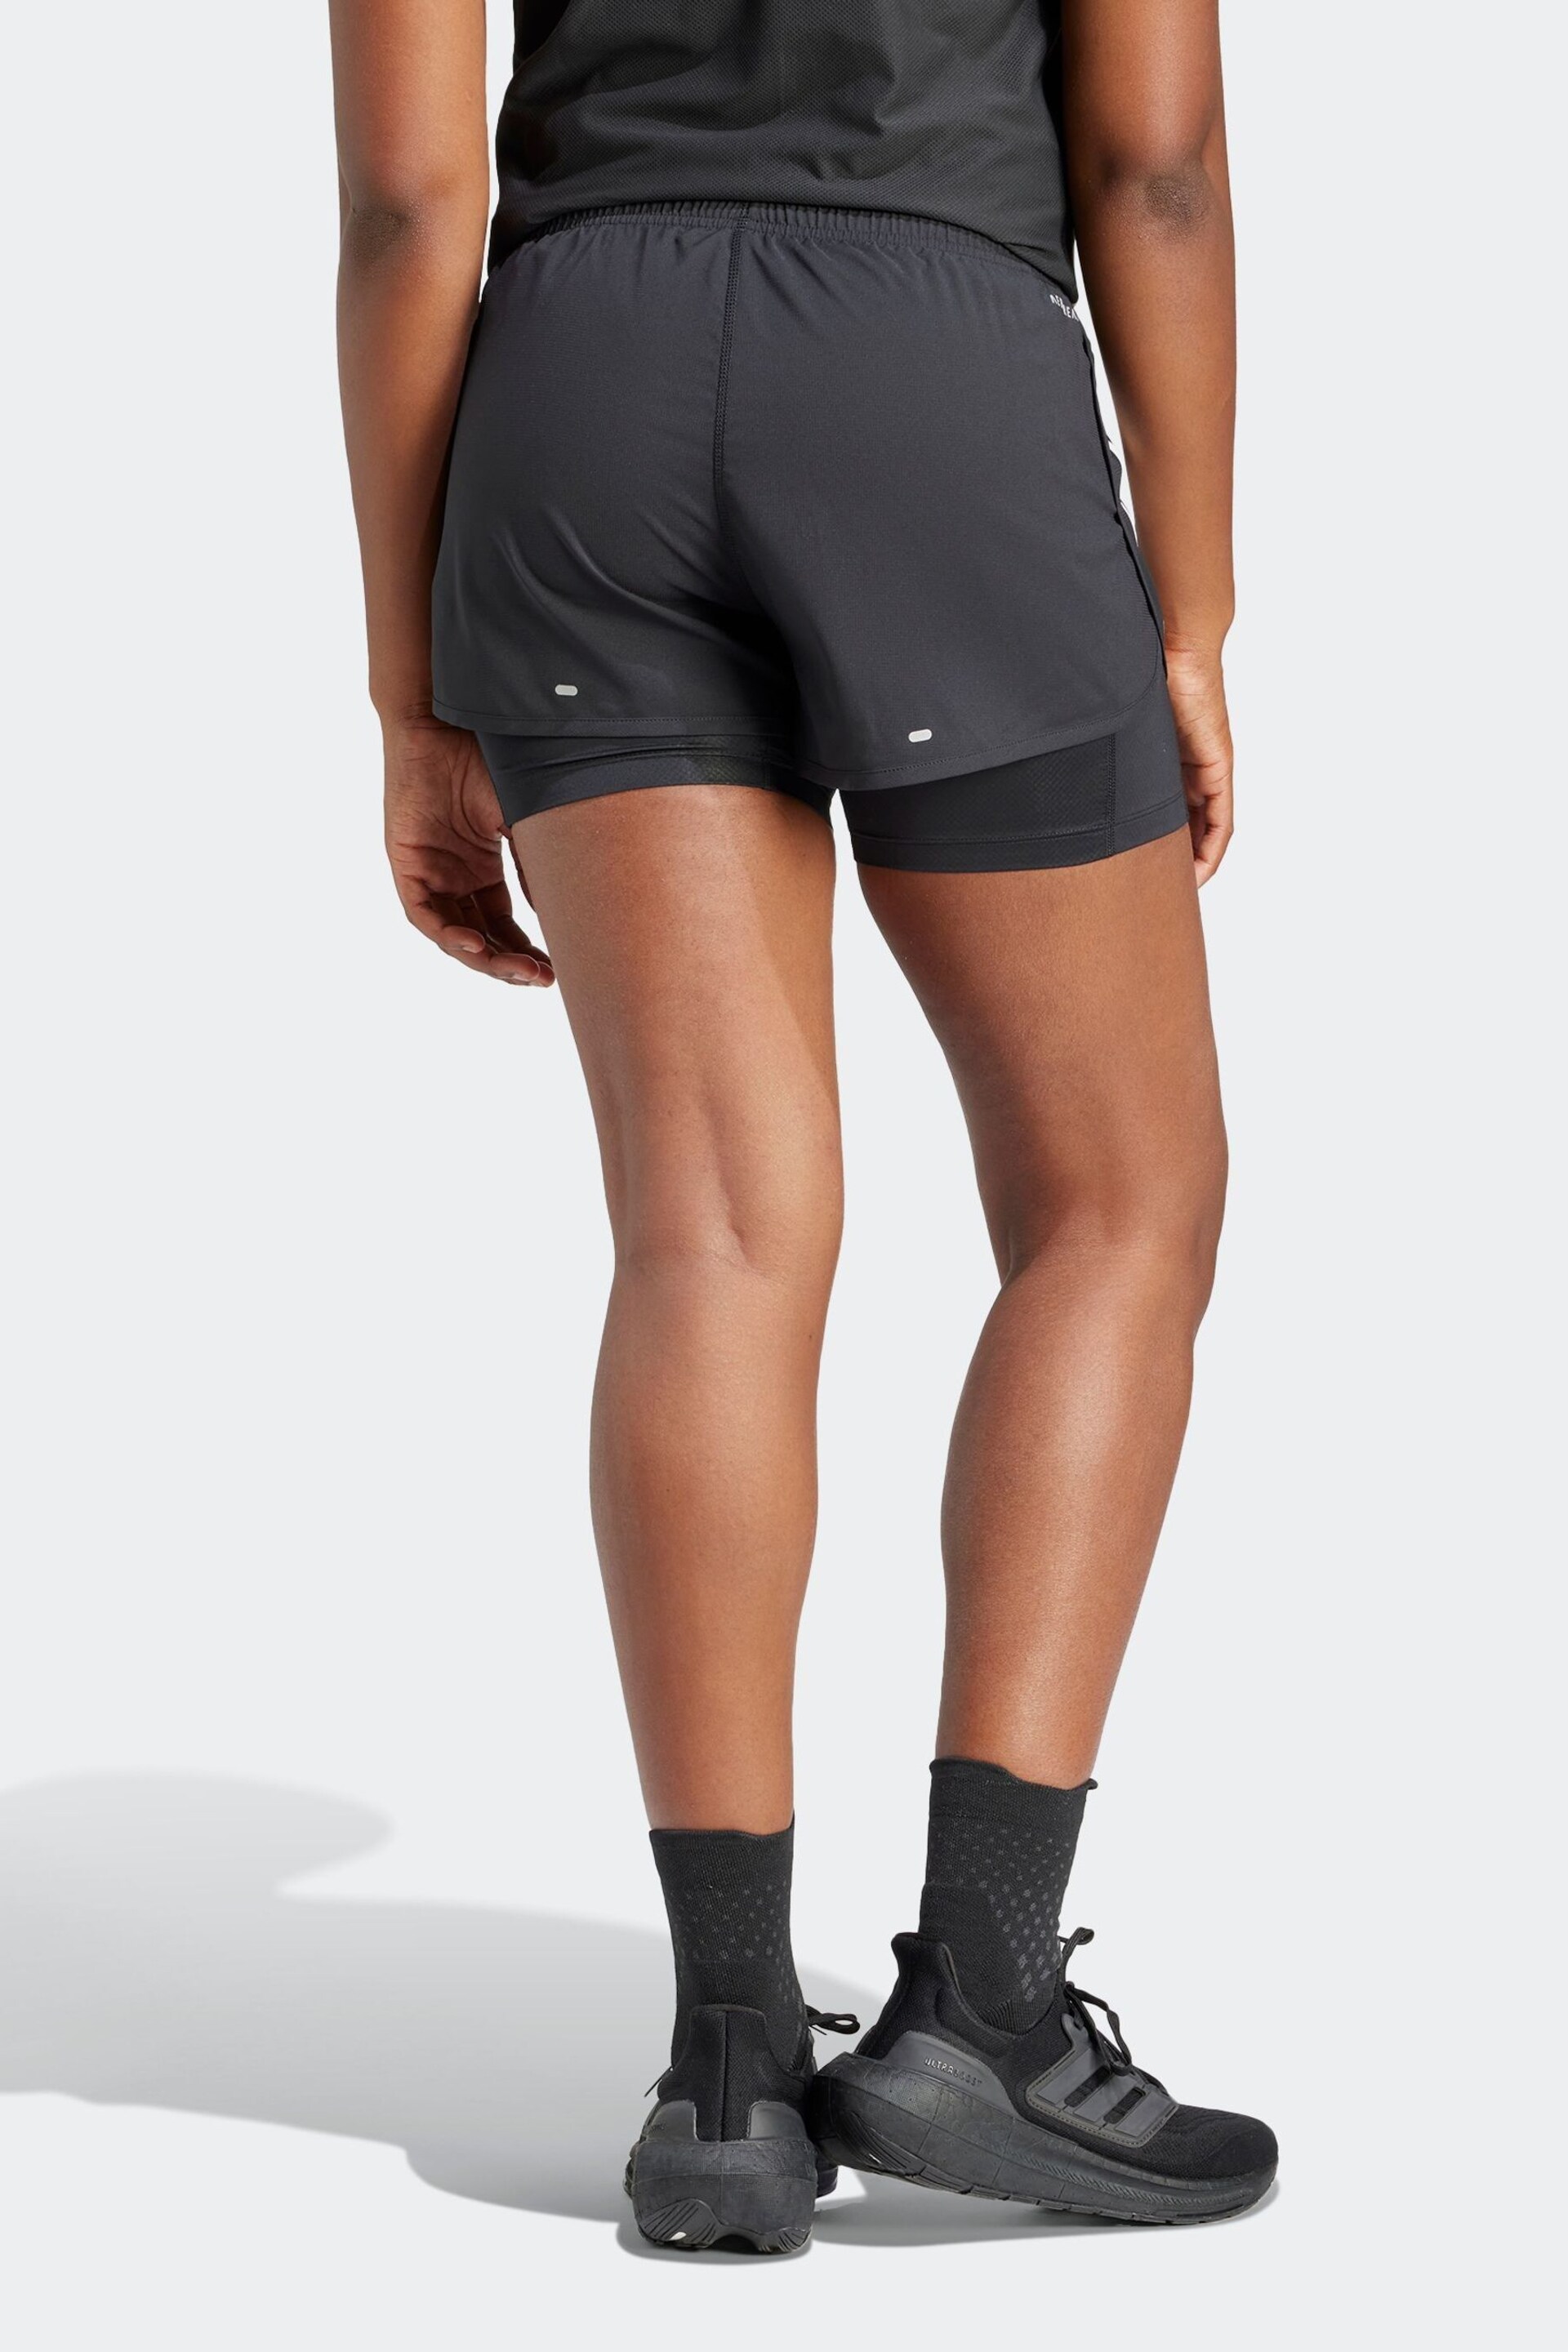 adidas Black 3 Strip 2-in-1 Shorts - Image 2 of 6